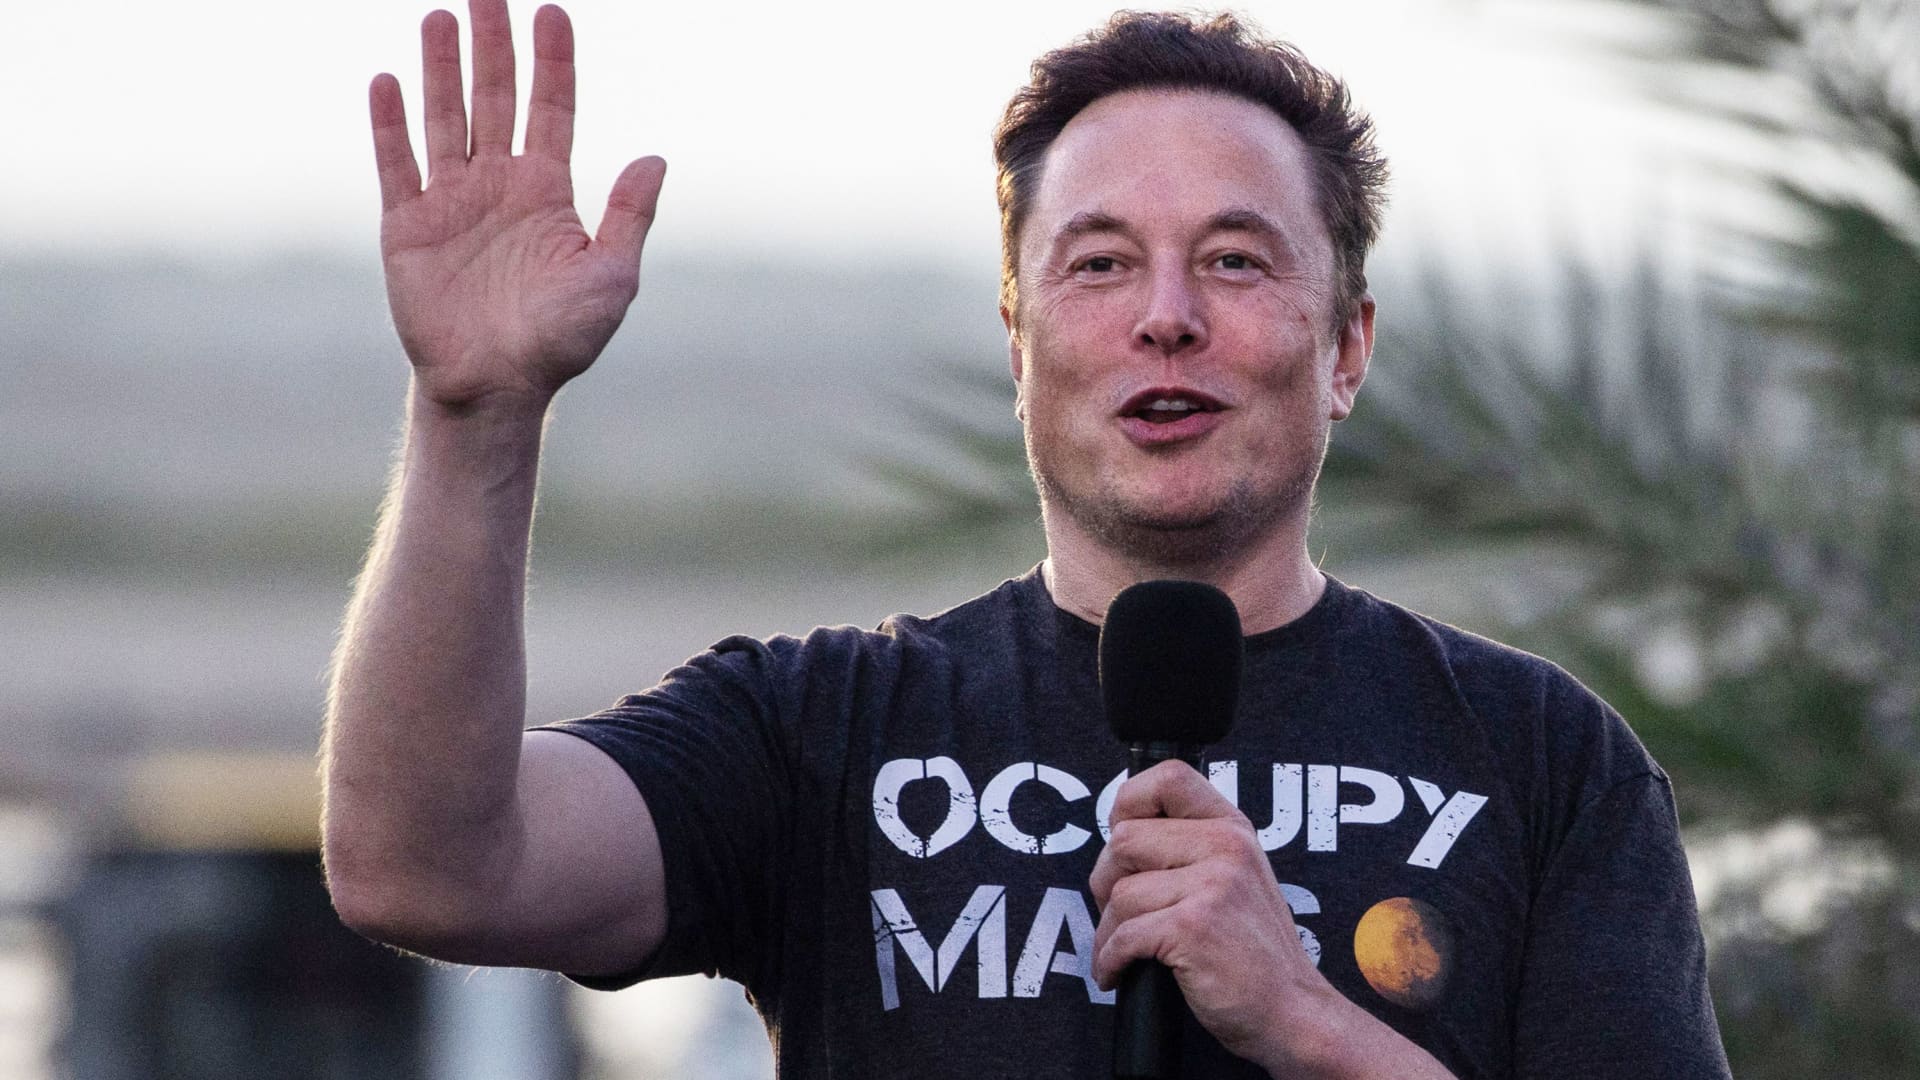 SpaceX Chief Engineer Elon Musk gestures during a joint news conference with T-Mobile CEO Mike Sievert (not pictured) at the SpaceX Starbase, in Brownsville, Texas, August 25, 2022.